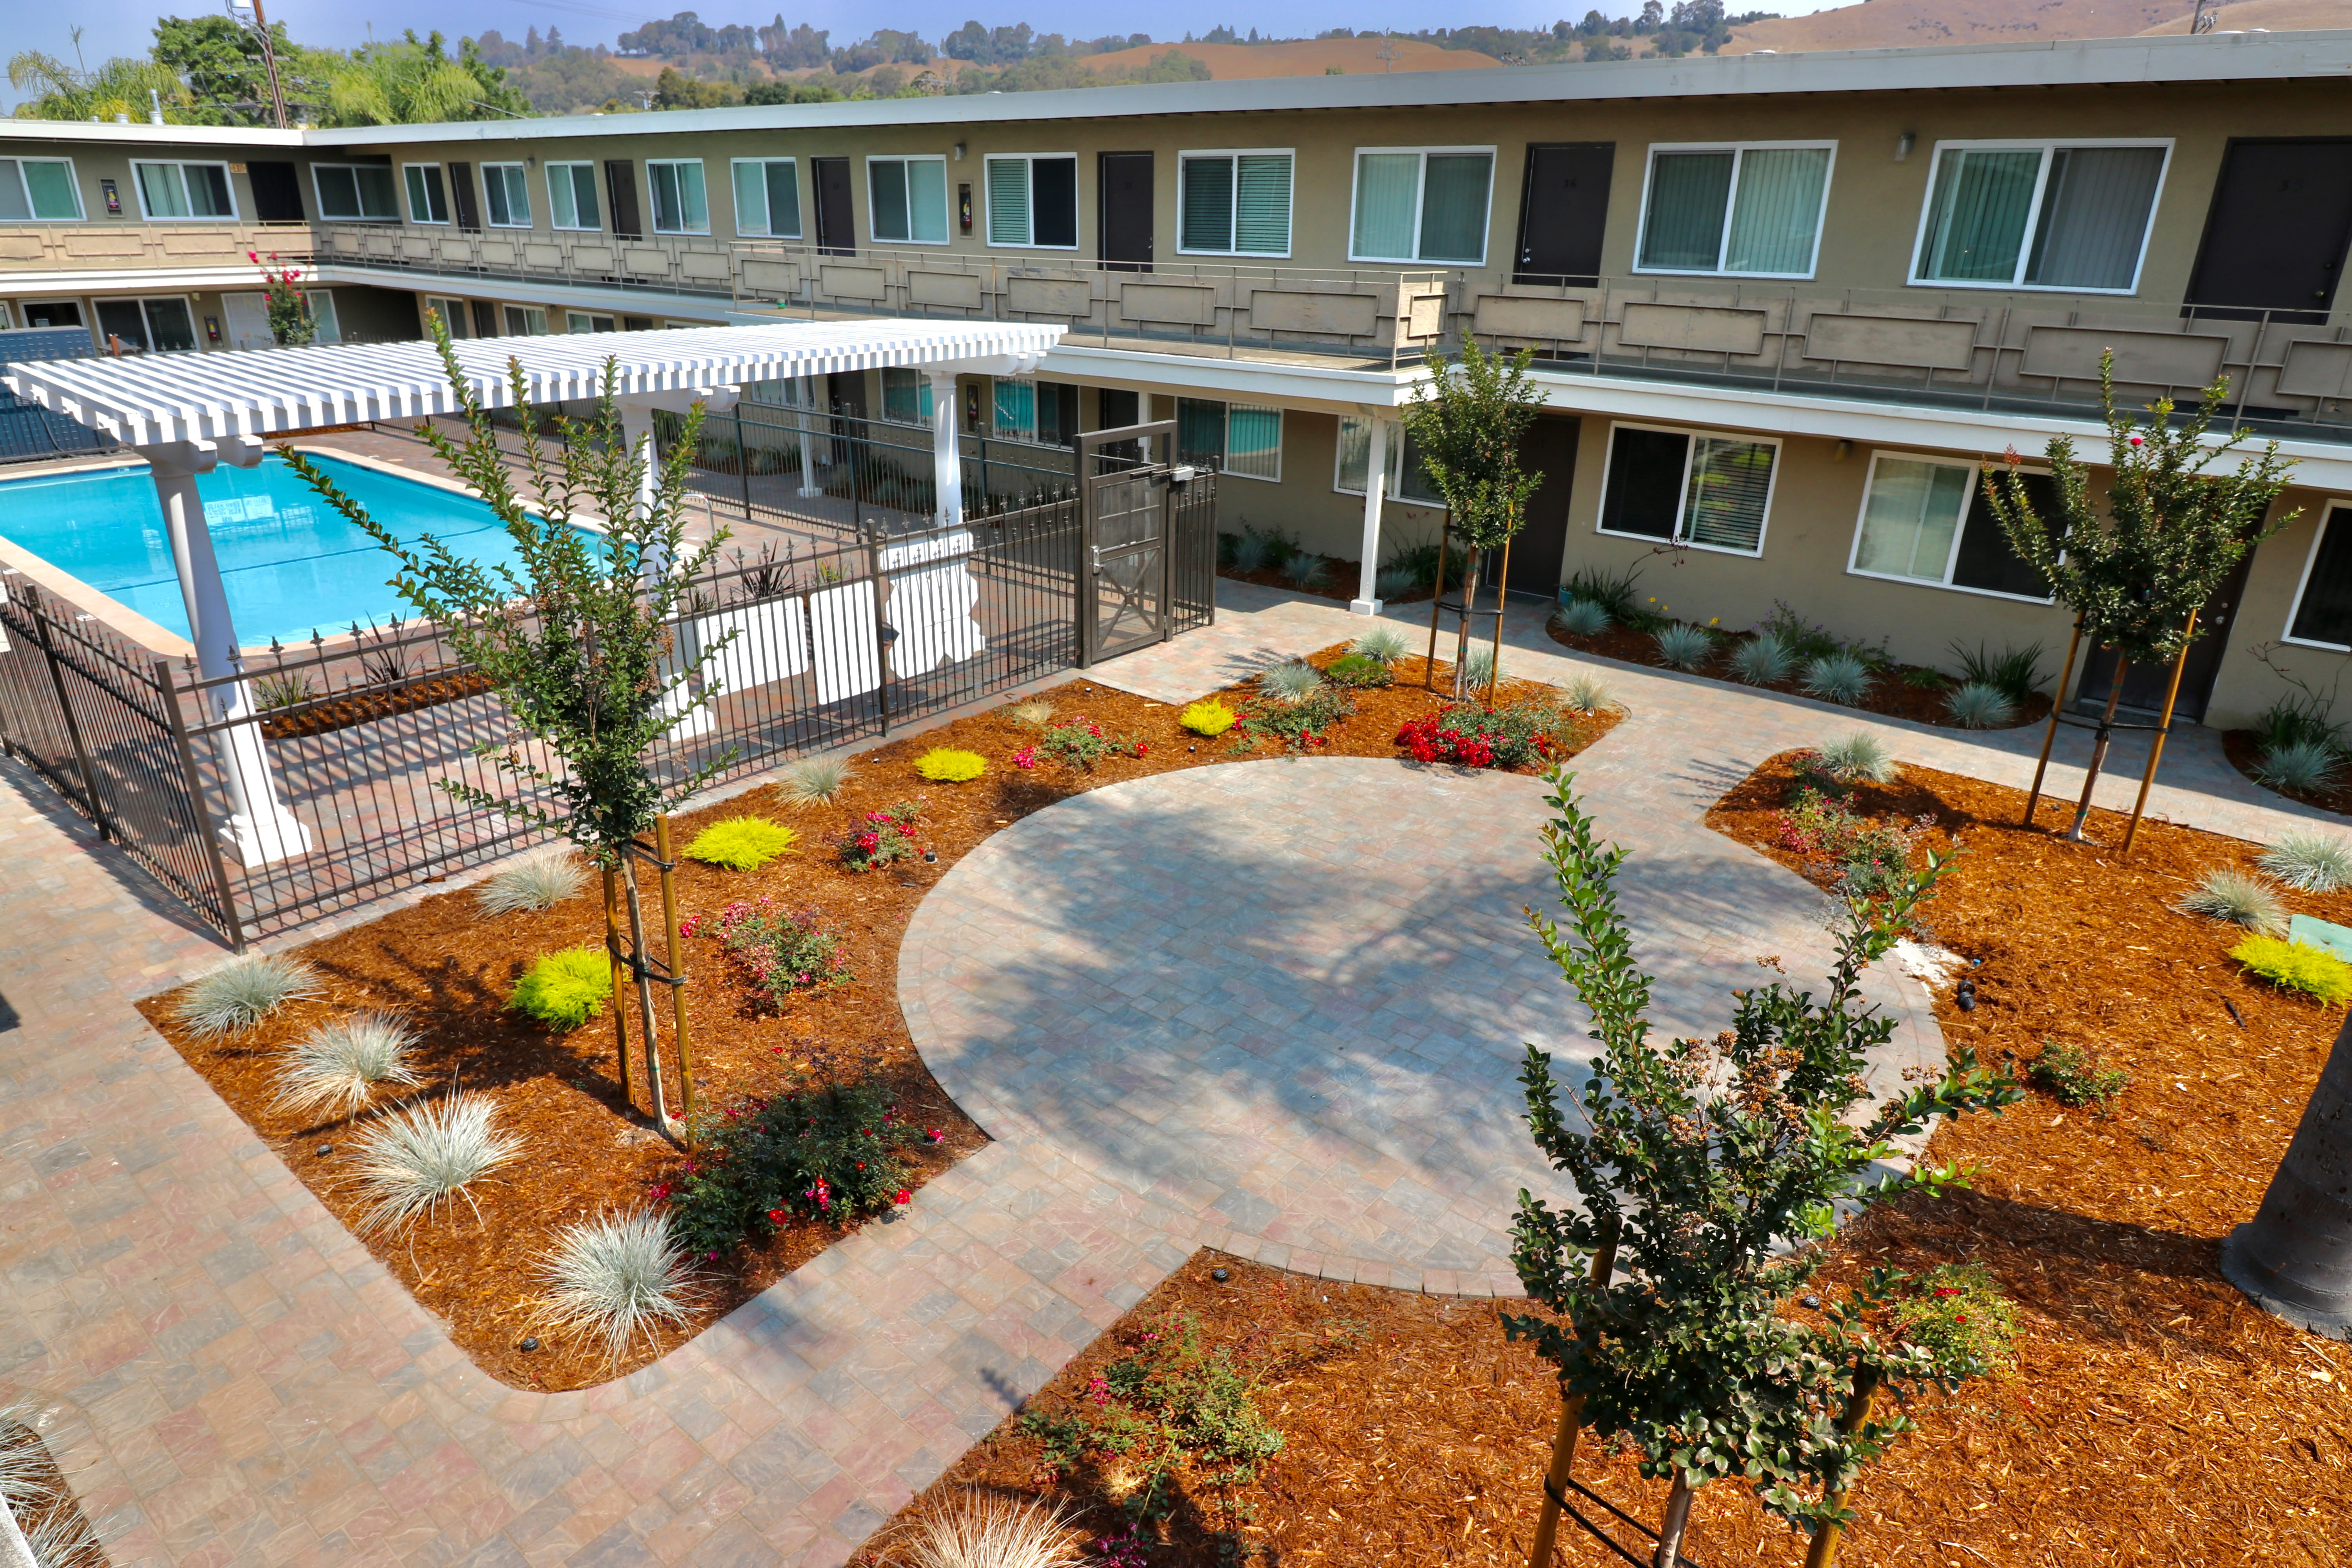 Courtyard and pool at Coral Gardens Apartment Homes in Hayward, California